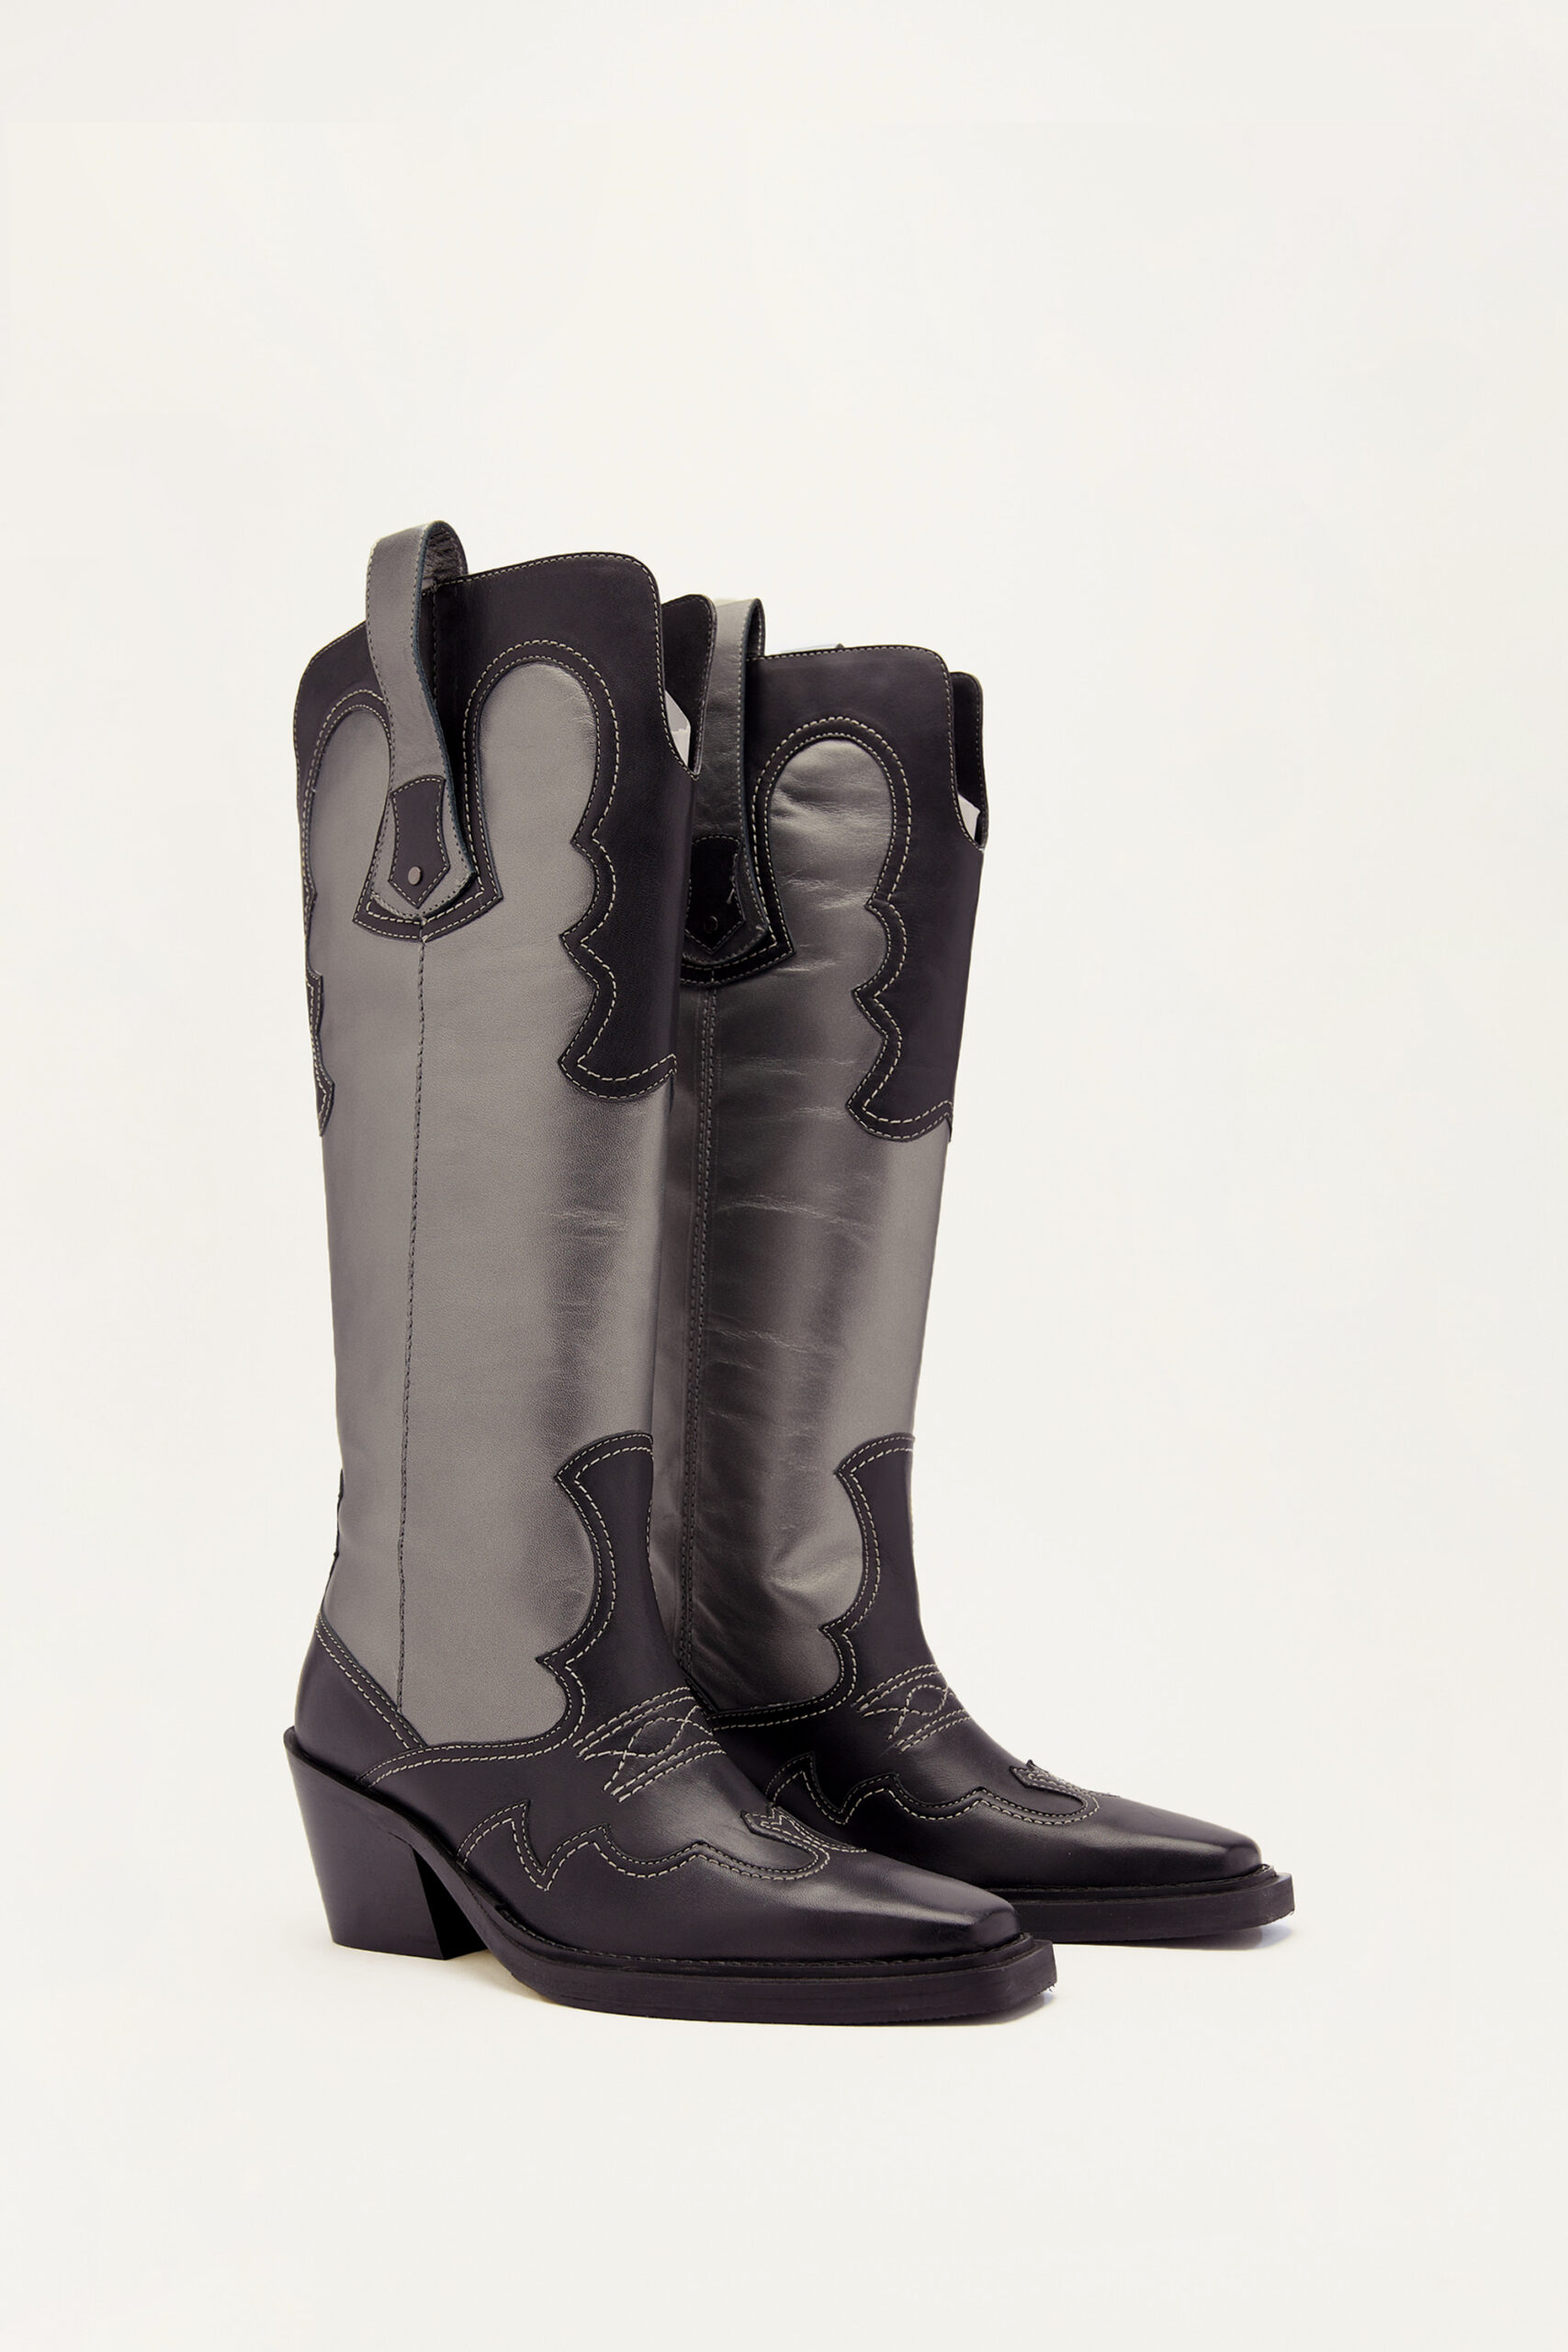 Real Leather Metallic Color Block Cowboy Boots